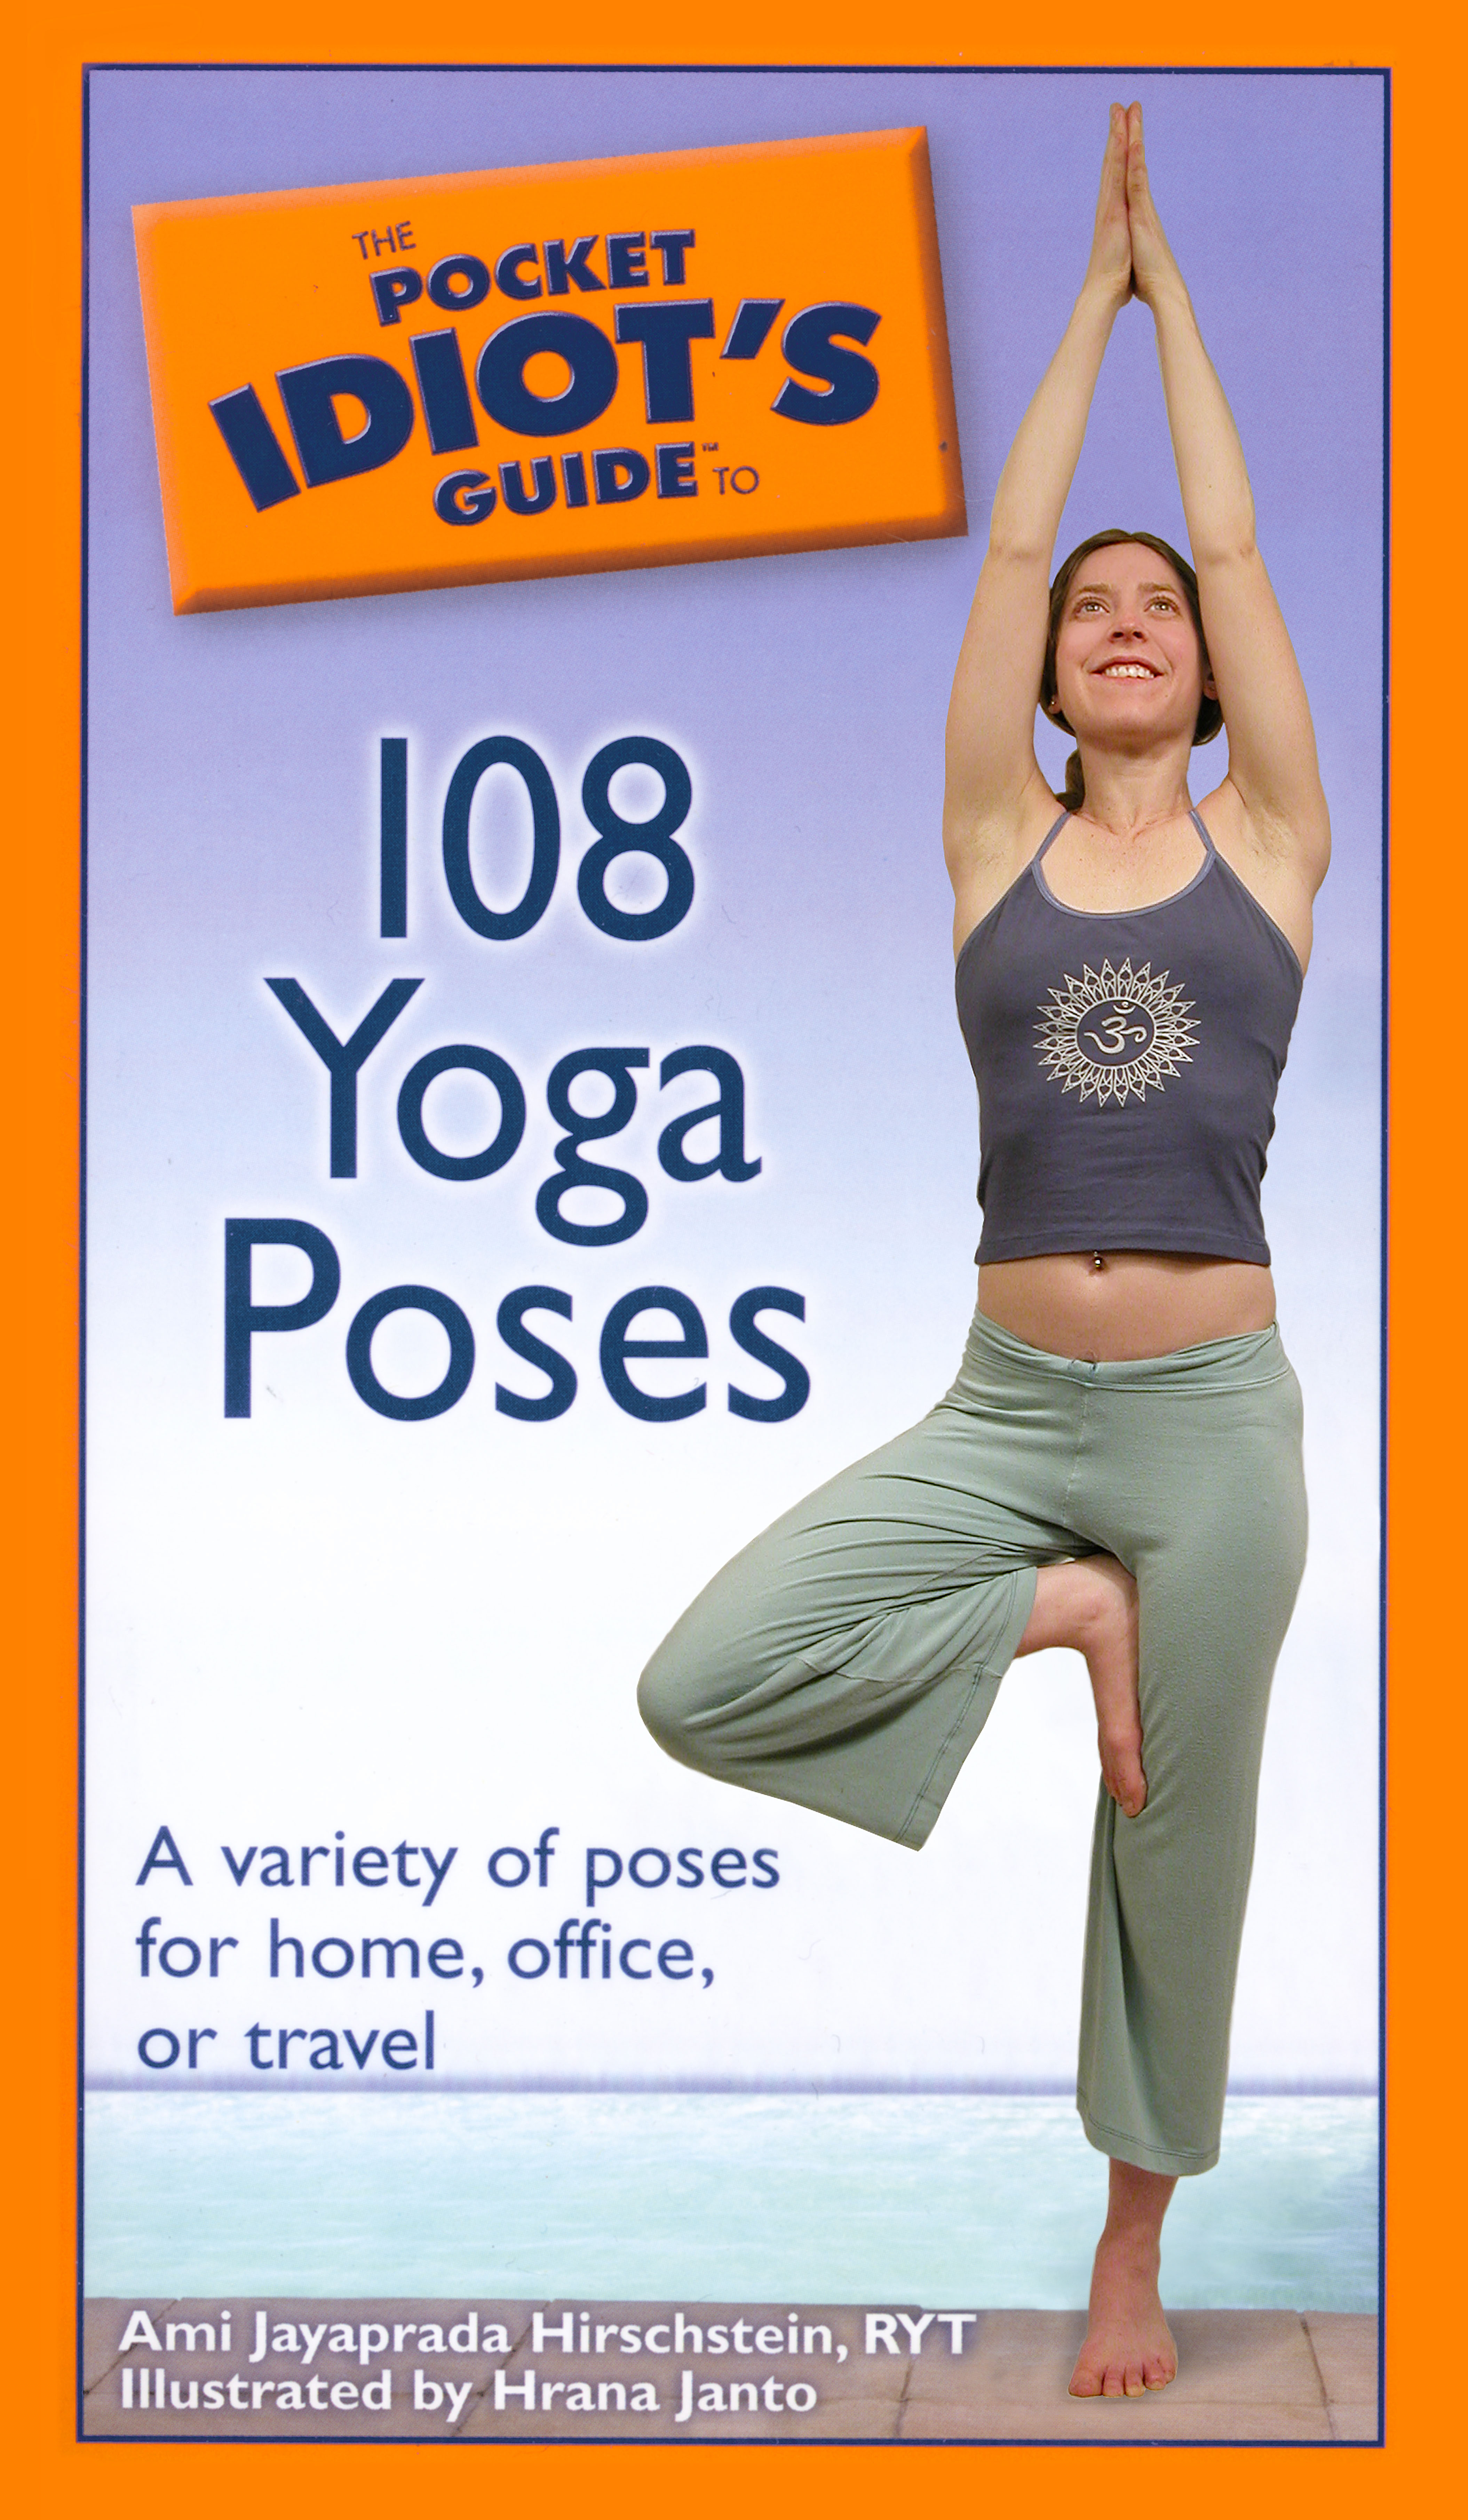 Yoga illustrated guide 108 Hirschstein, by  pocket  by  Jayaprada poses guide, yoga Poses,